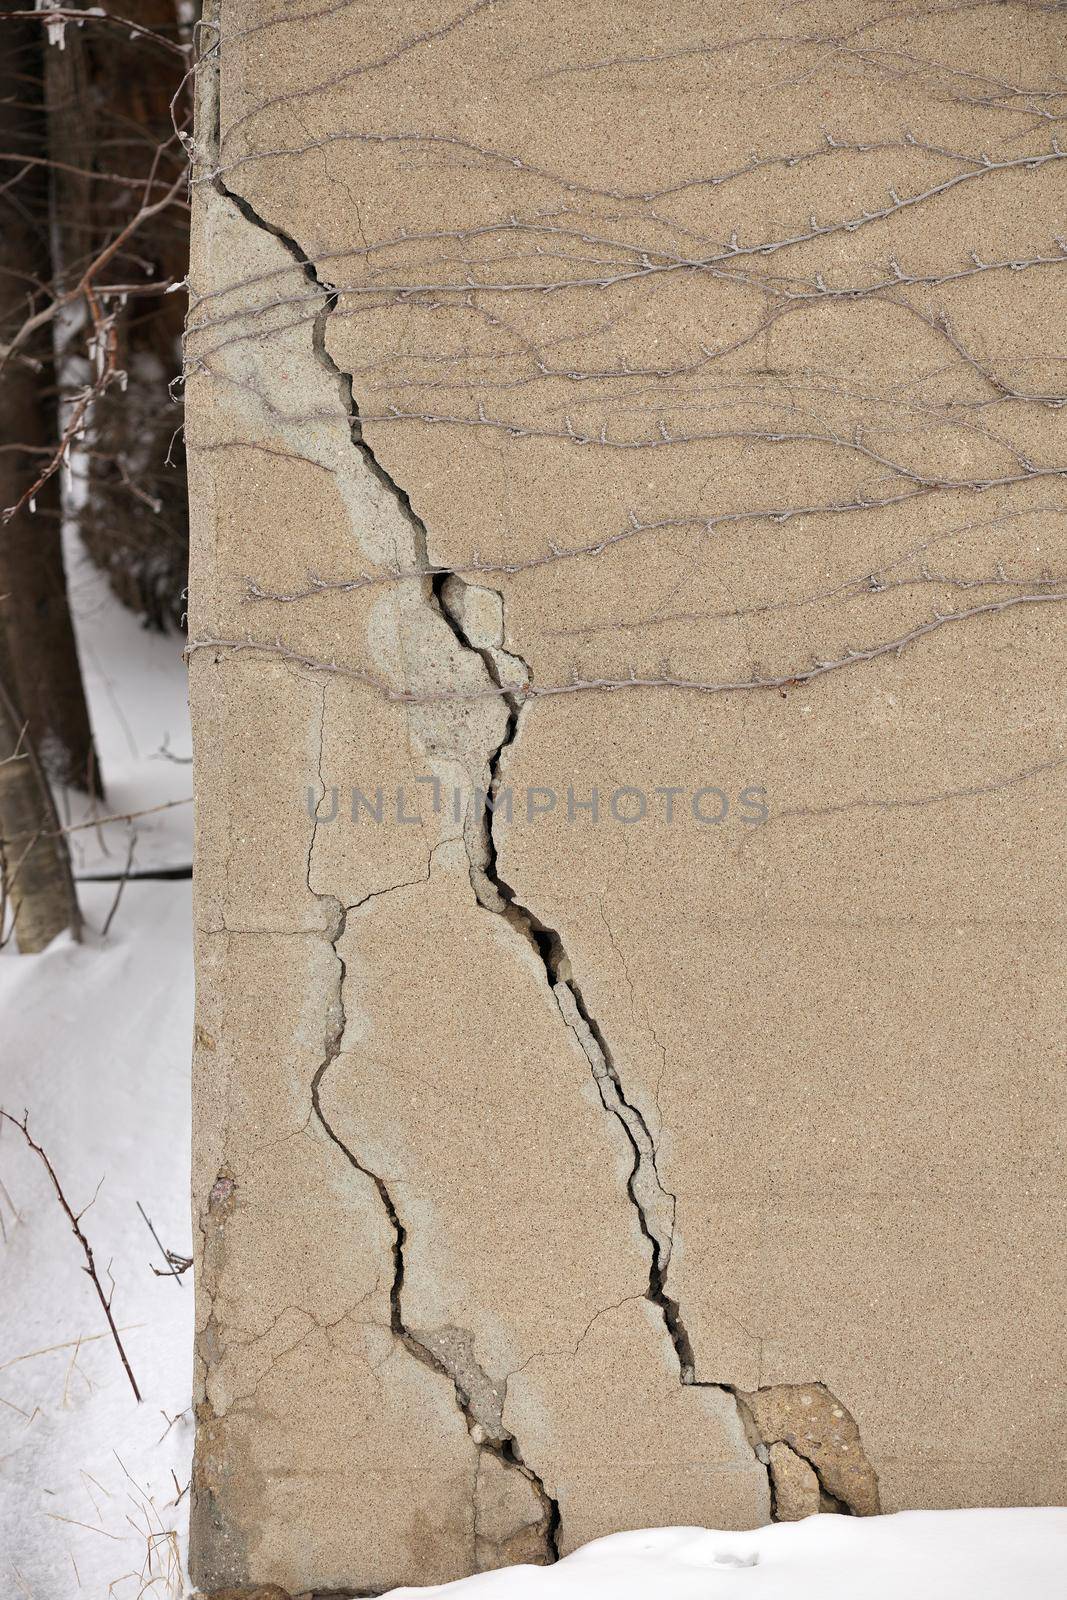 Large Cracks in Concrete Building Foundation. Cement has some vines growing on it. High quality photo